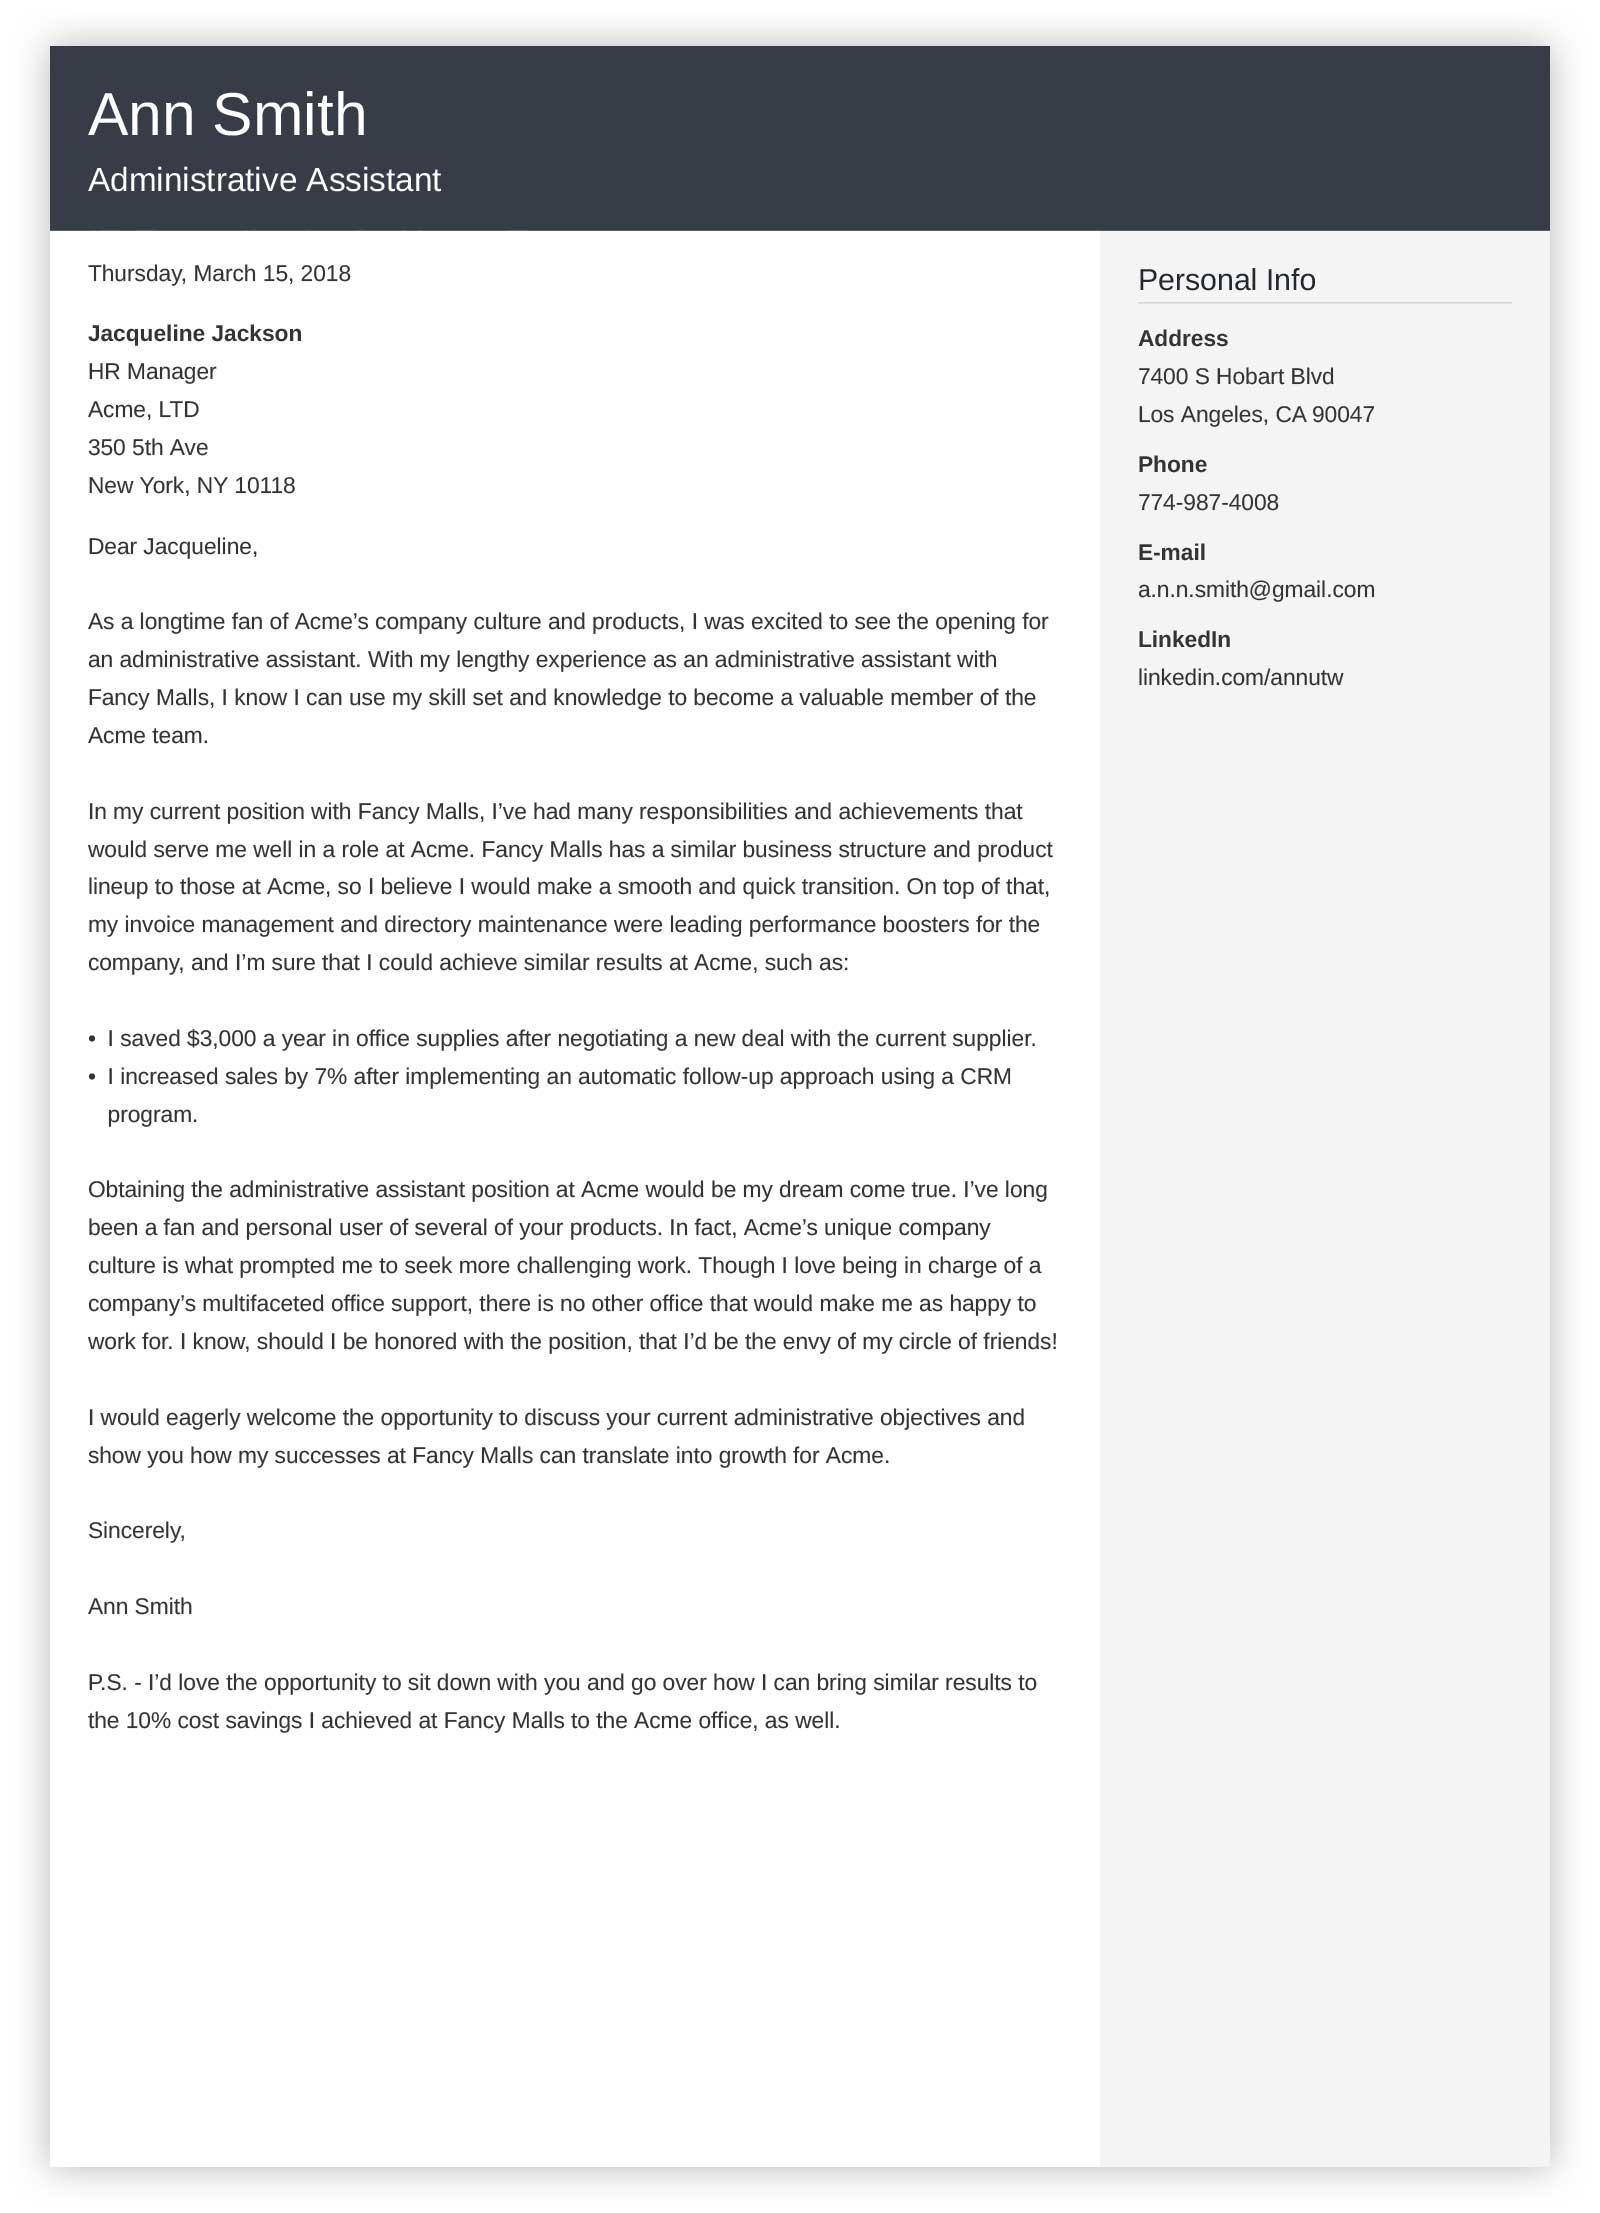 Personal Assistant Cover Letter from cdn-images.zety.com